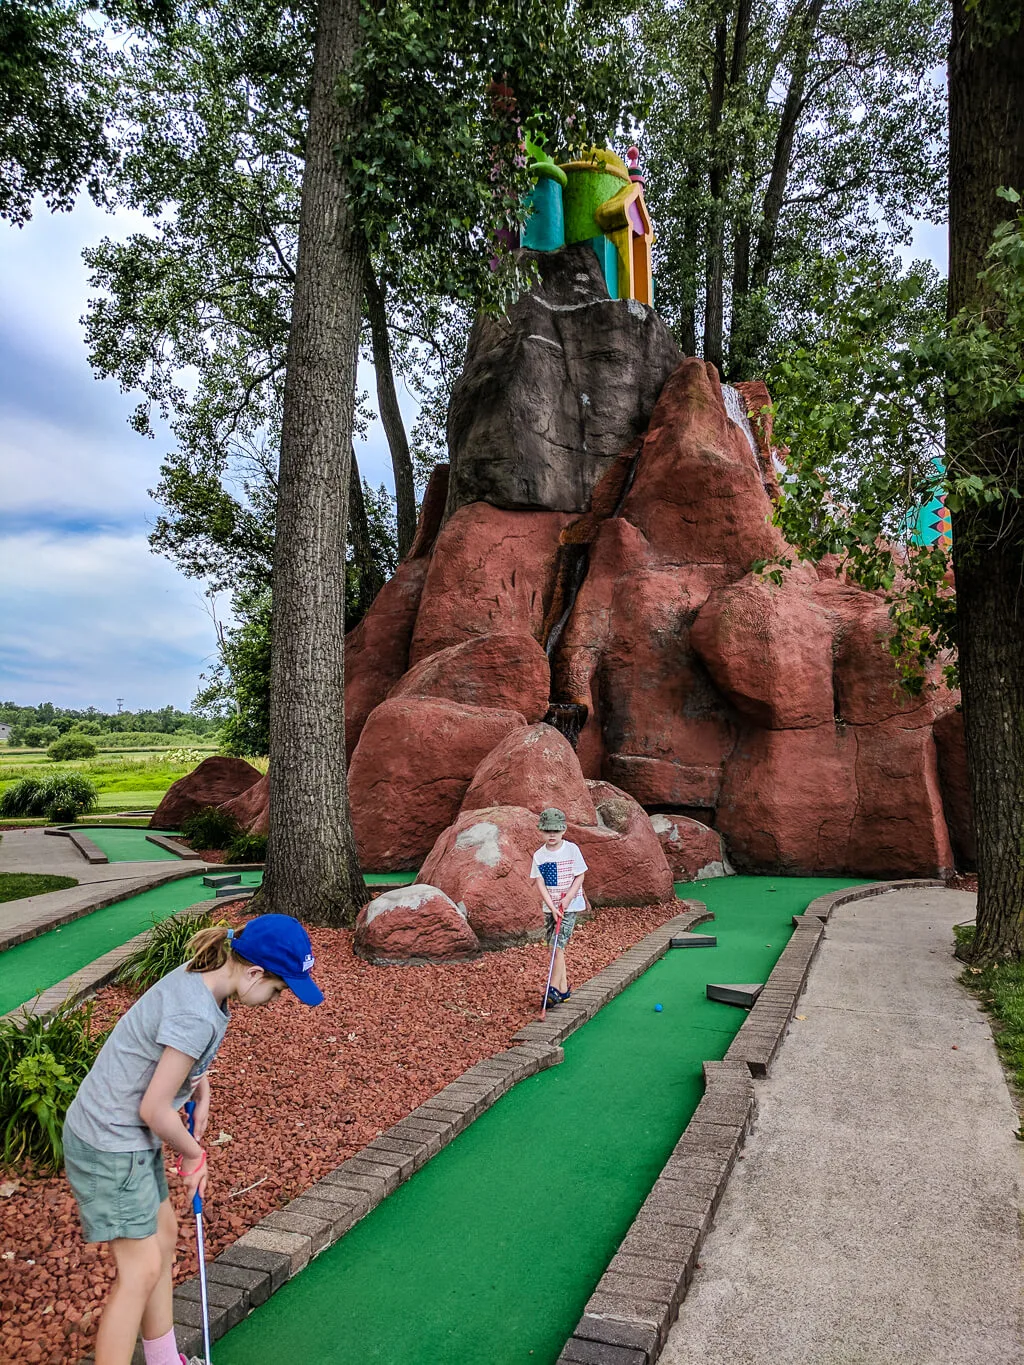 Miniature golf course in the summer